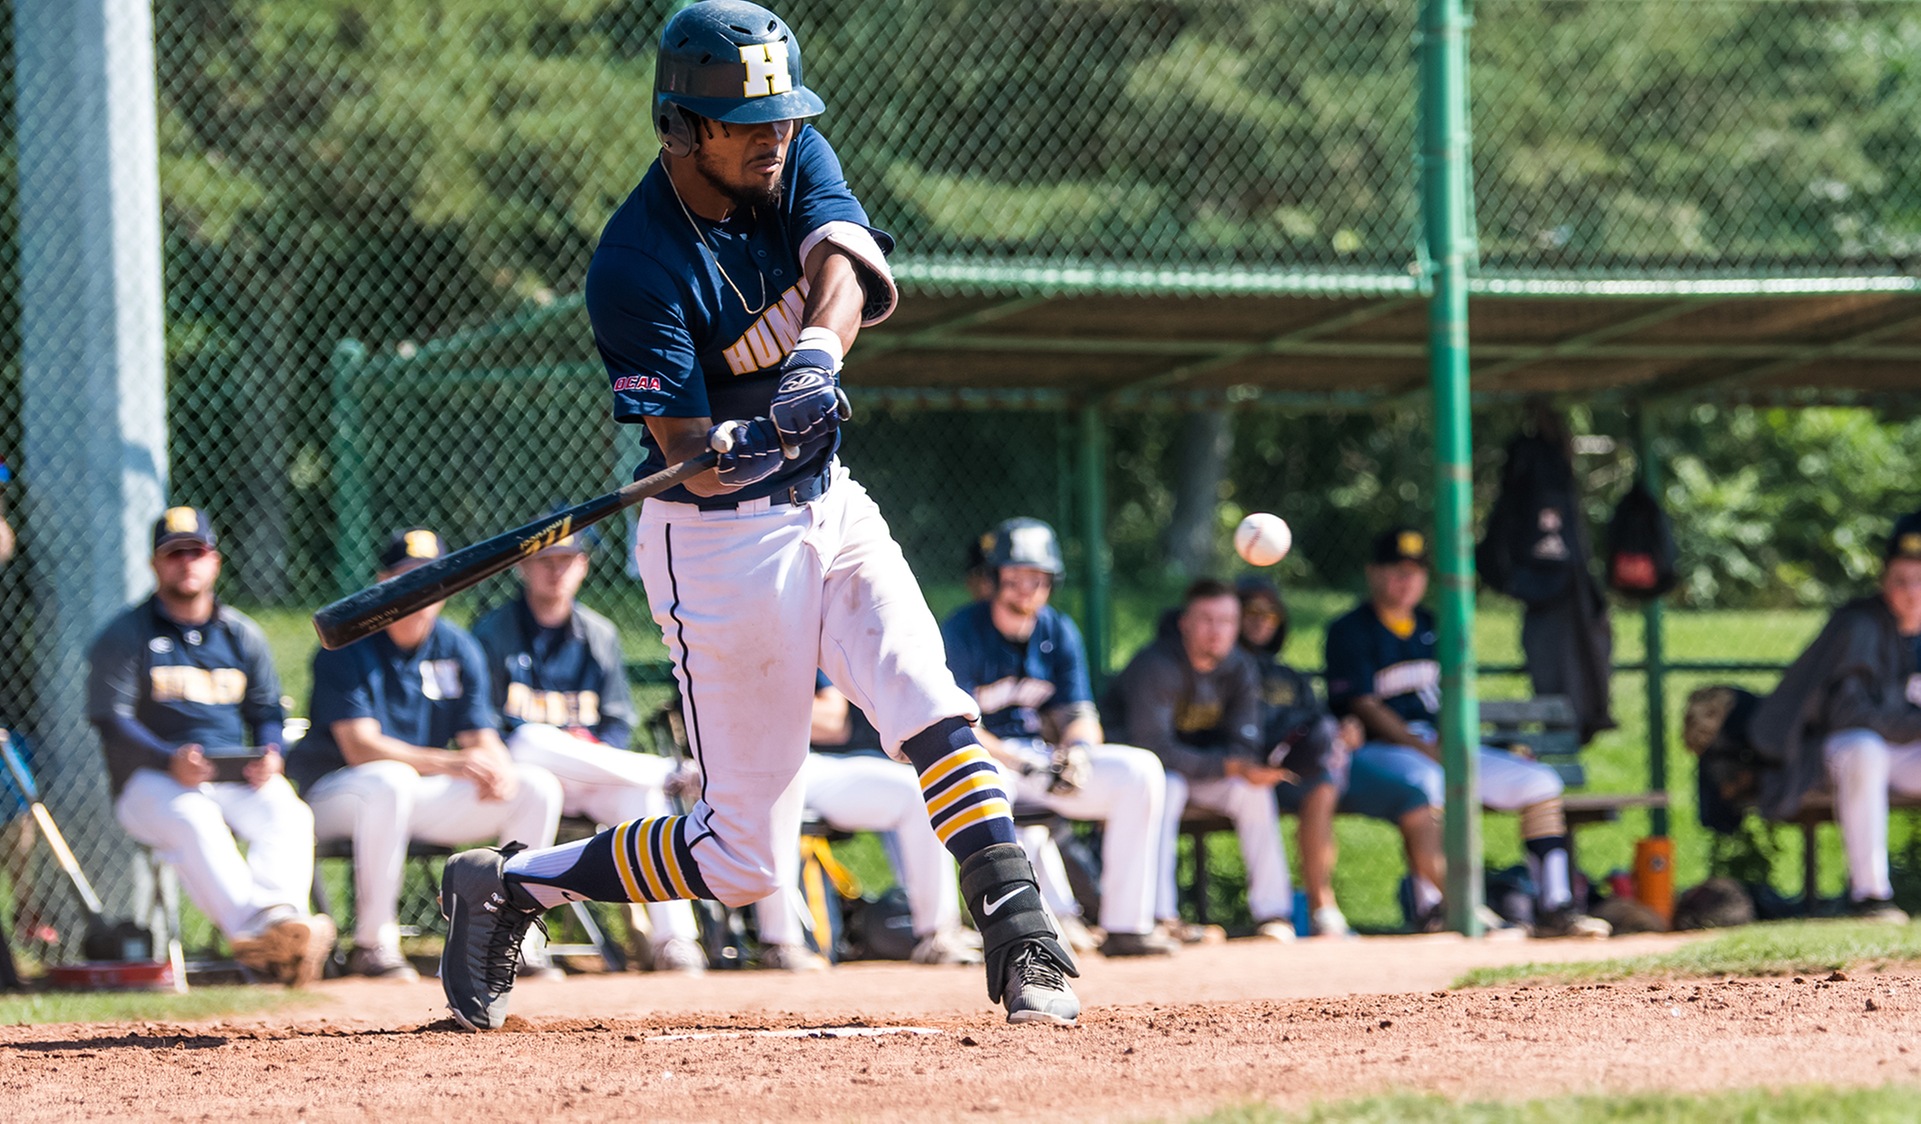 GAME TWO WALK-OFF WIN GIVES HAWKS SWEEP OF FANSHAWE ON SUNDAY